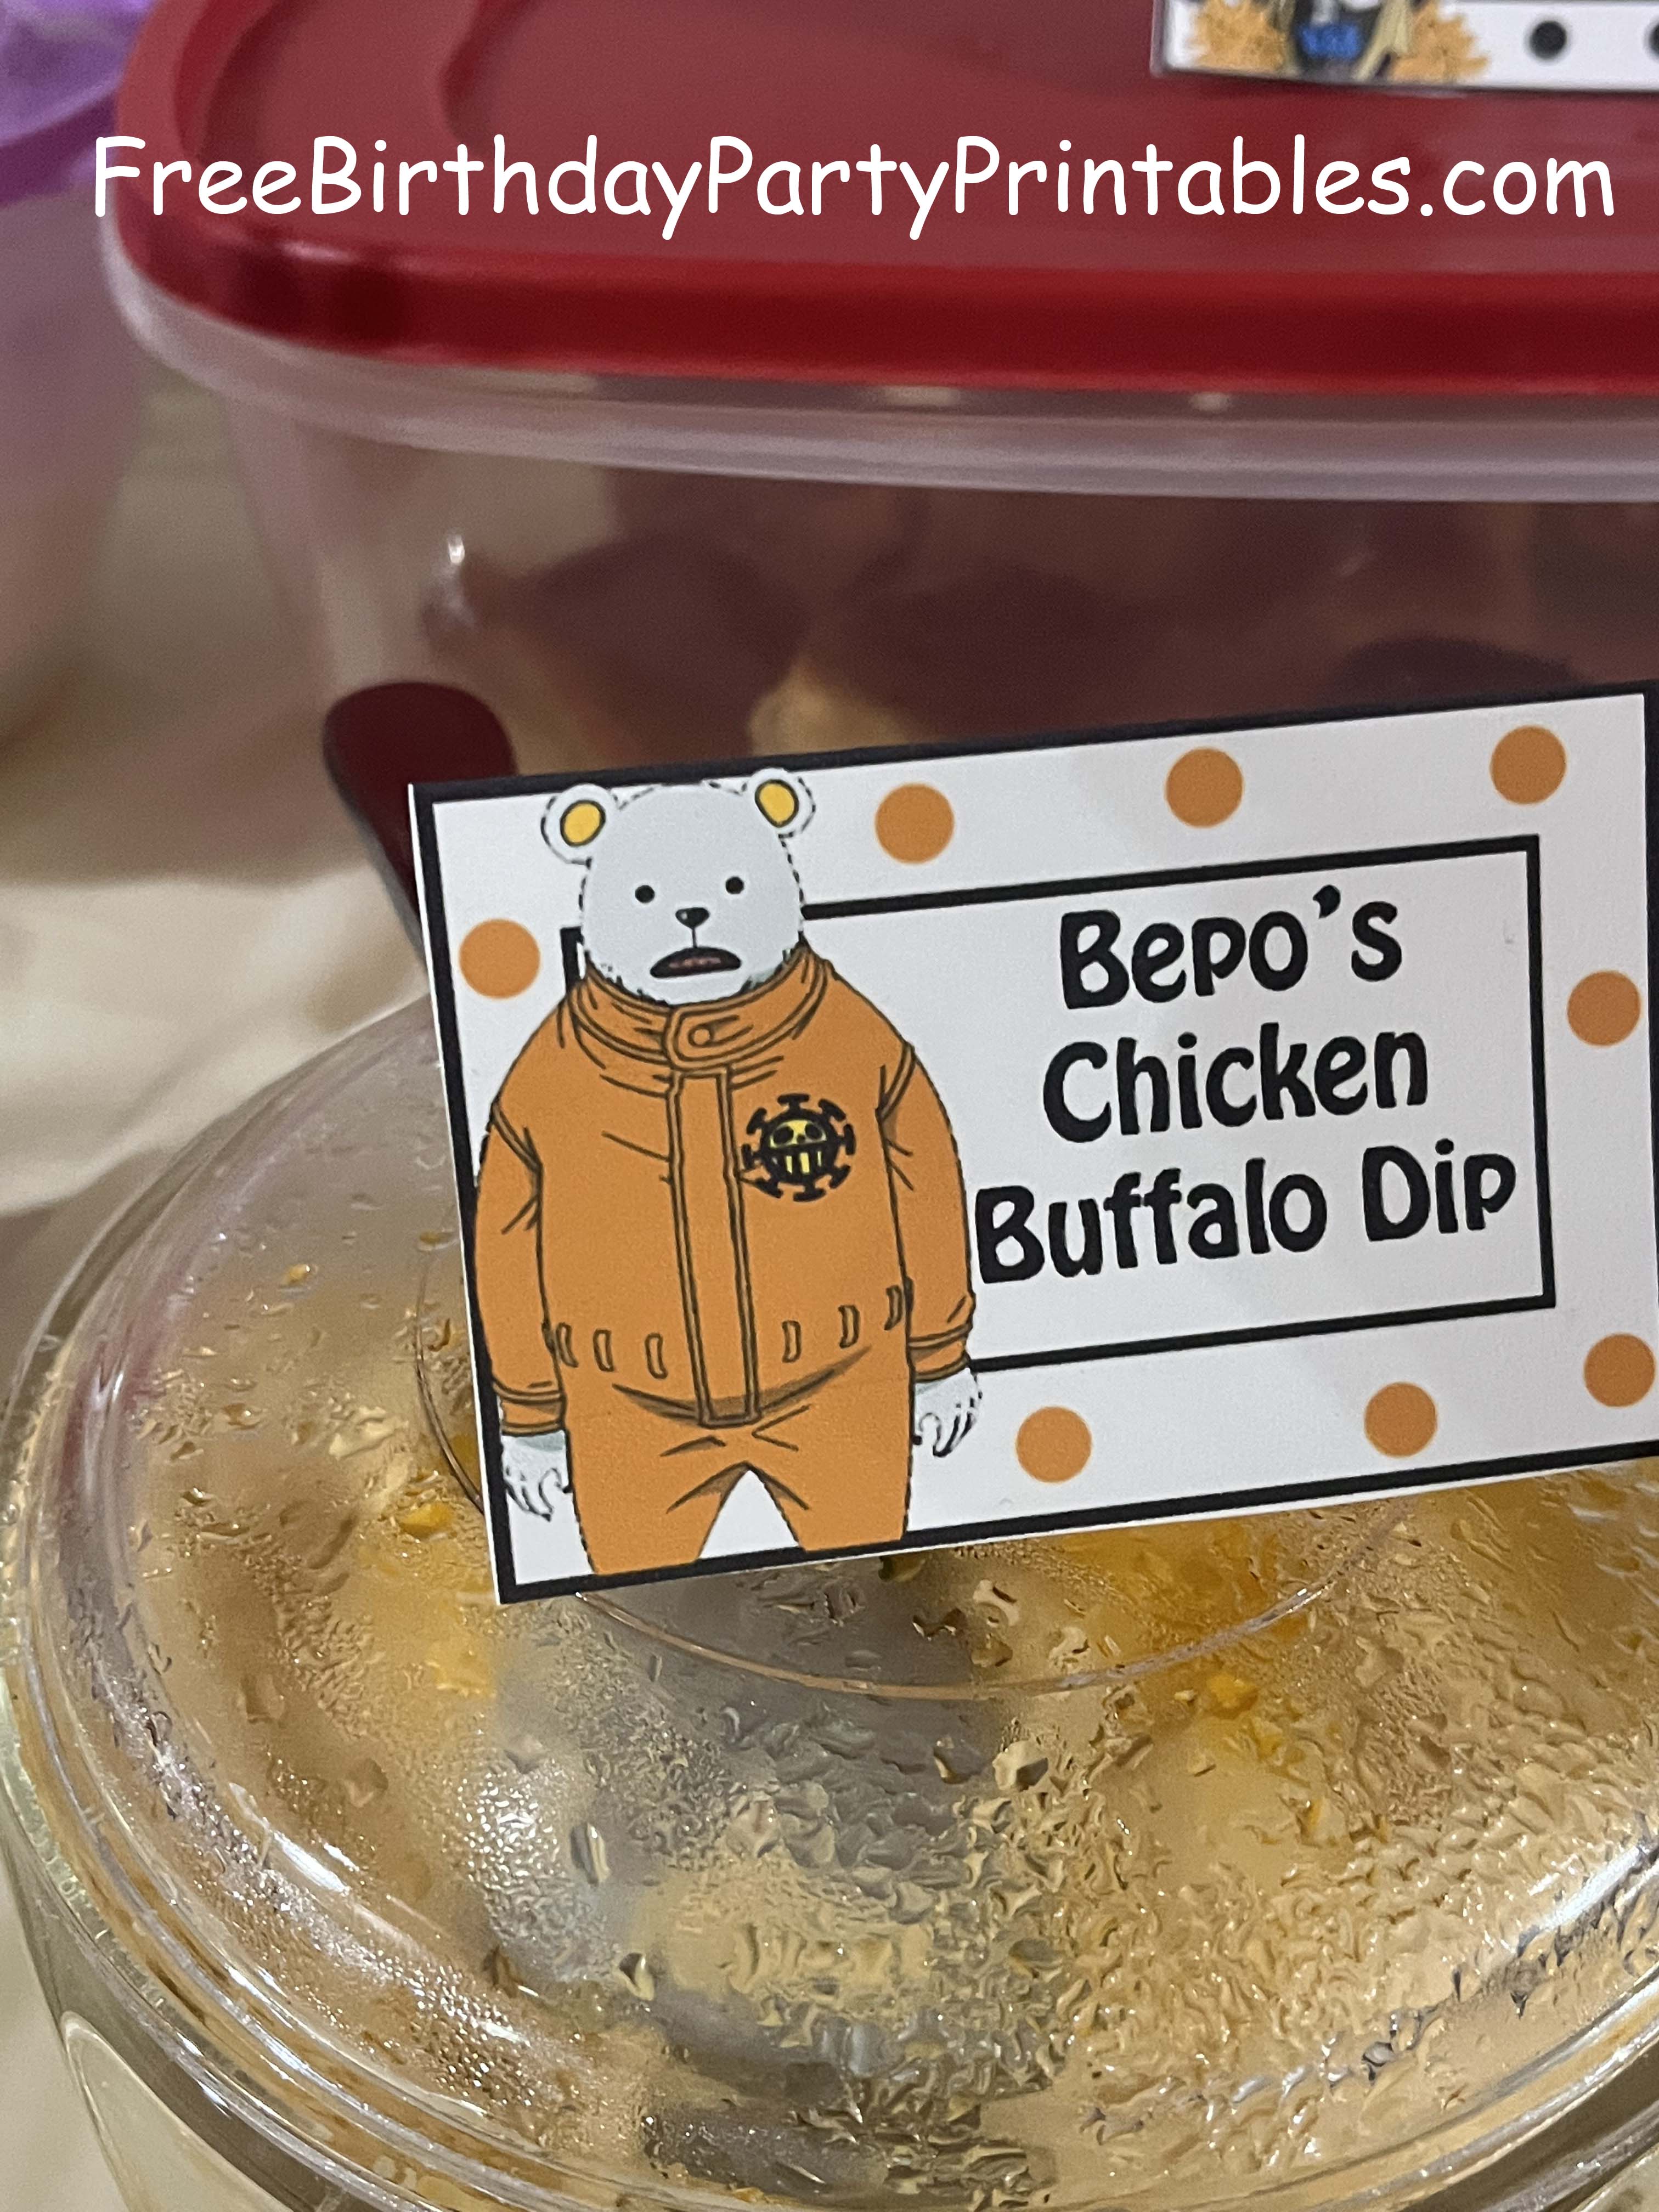 One Piece Birthday Party Printables Free Food Cards Bepo's Chicken Buffalo Dip